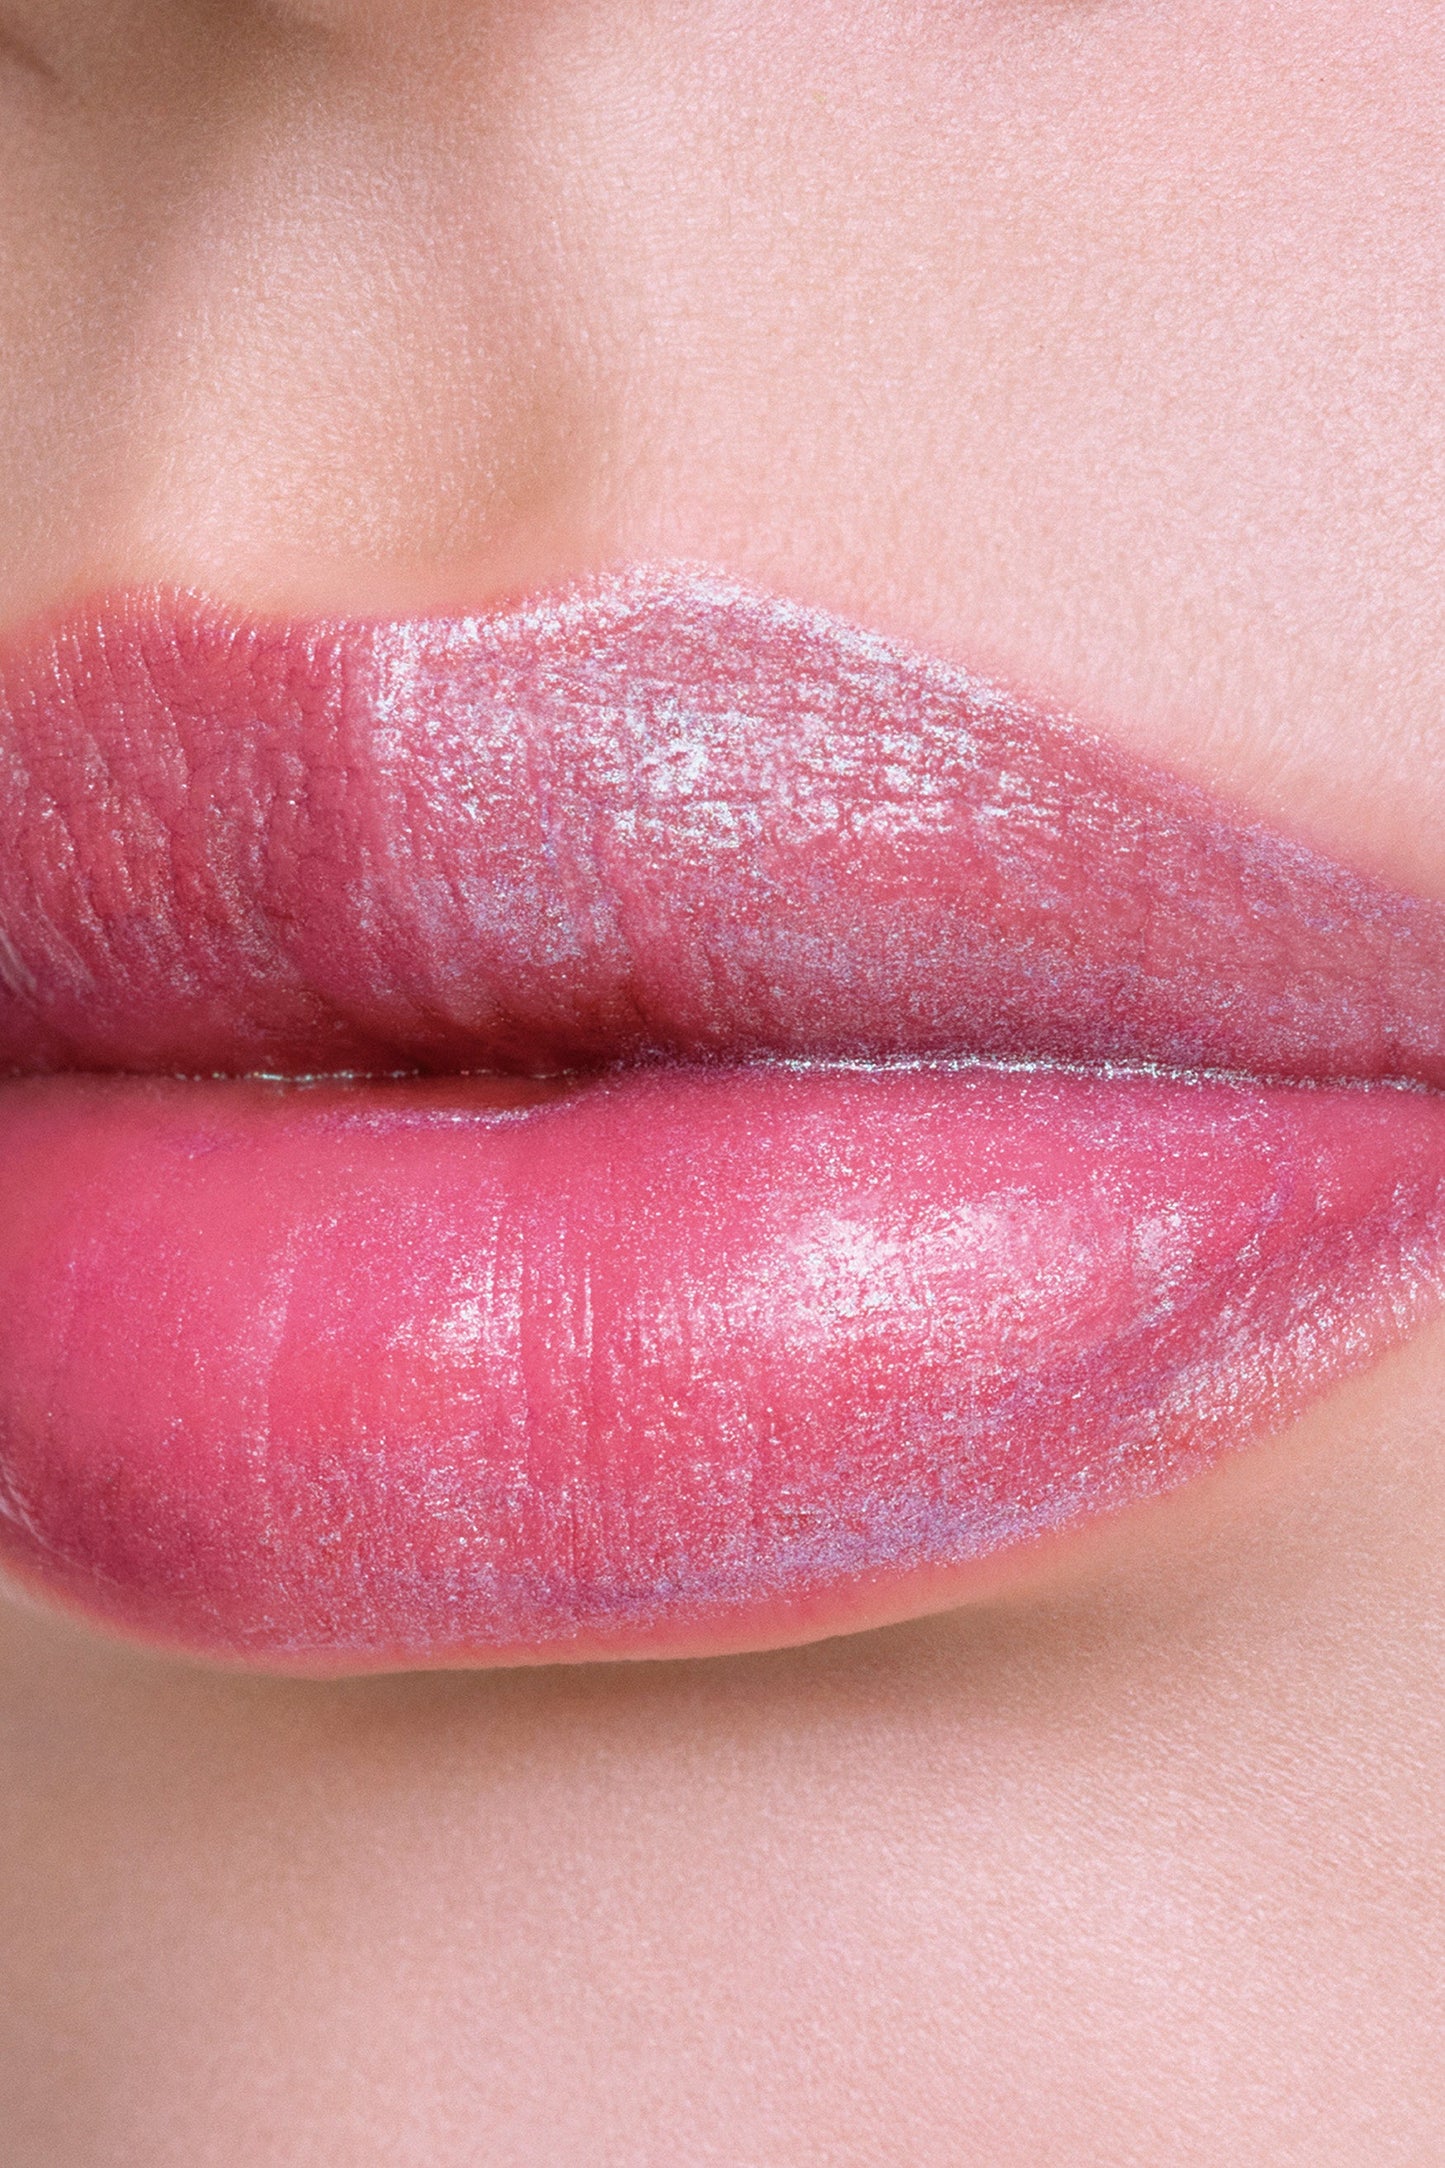 This lip with Lilac pearl fruit extract - moisturizer gives your lips a natural and dewy tone